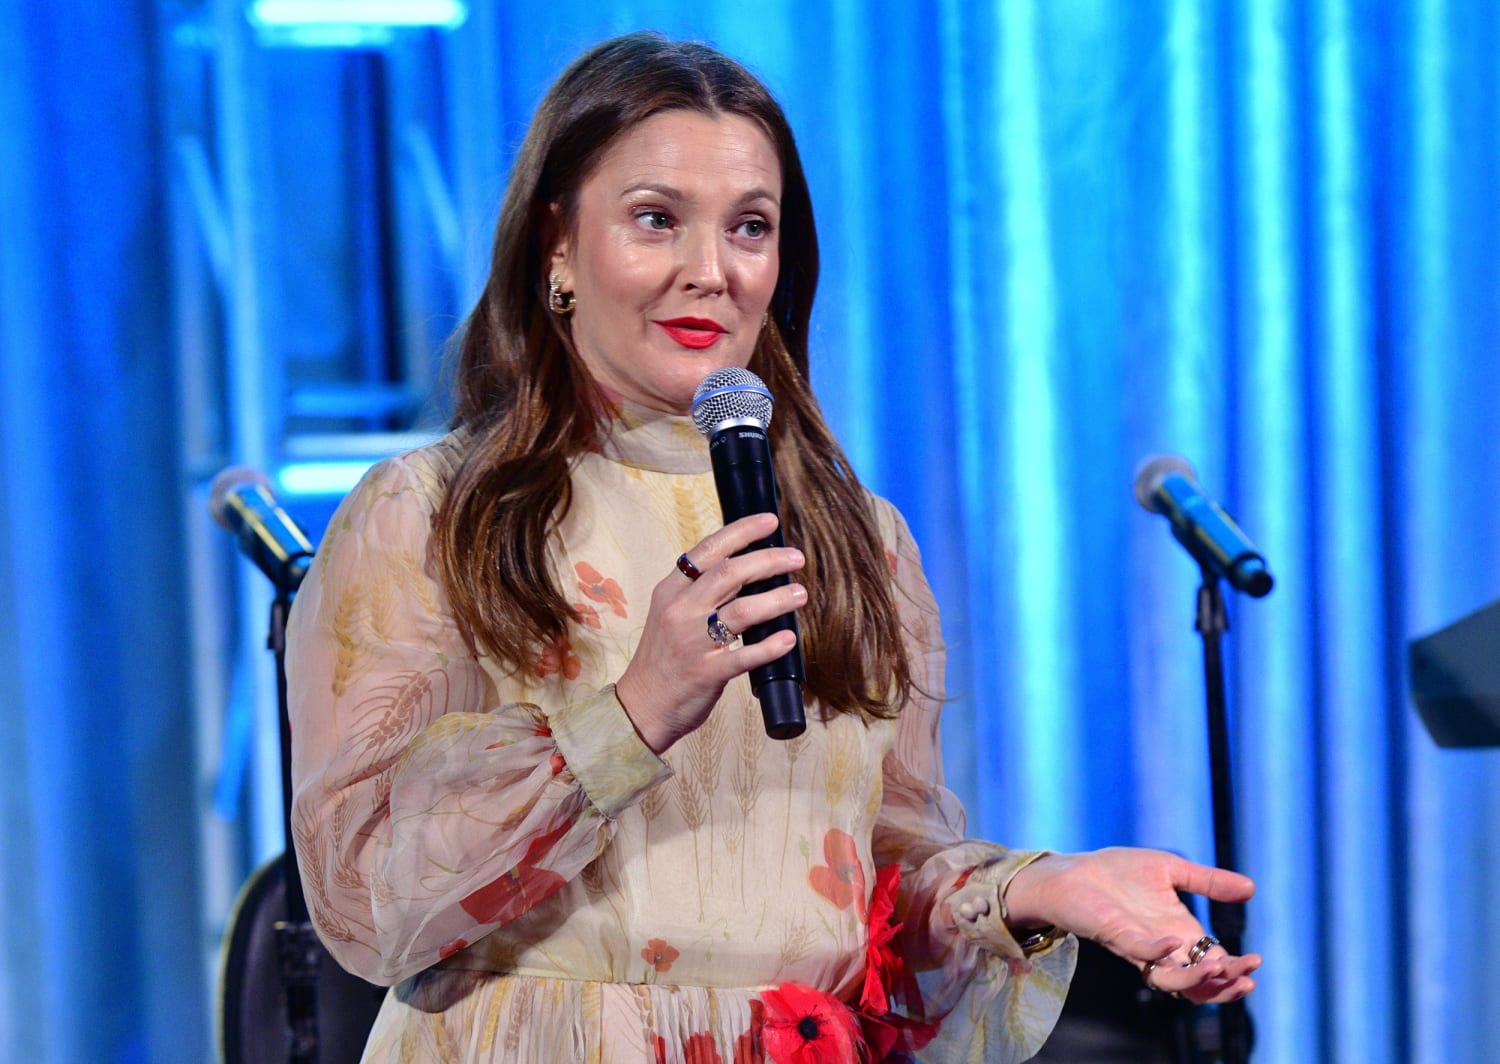 Drew Barrymore says she won’t resume talk show amid strikes after backlash